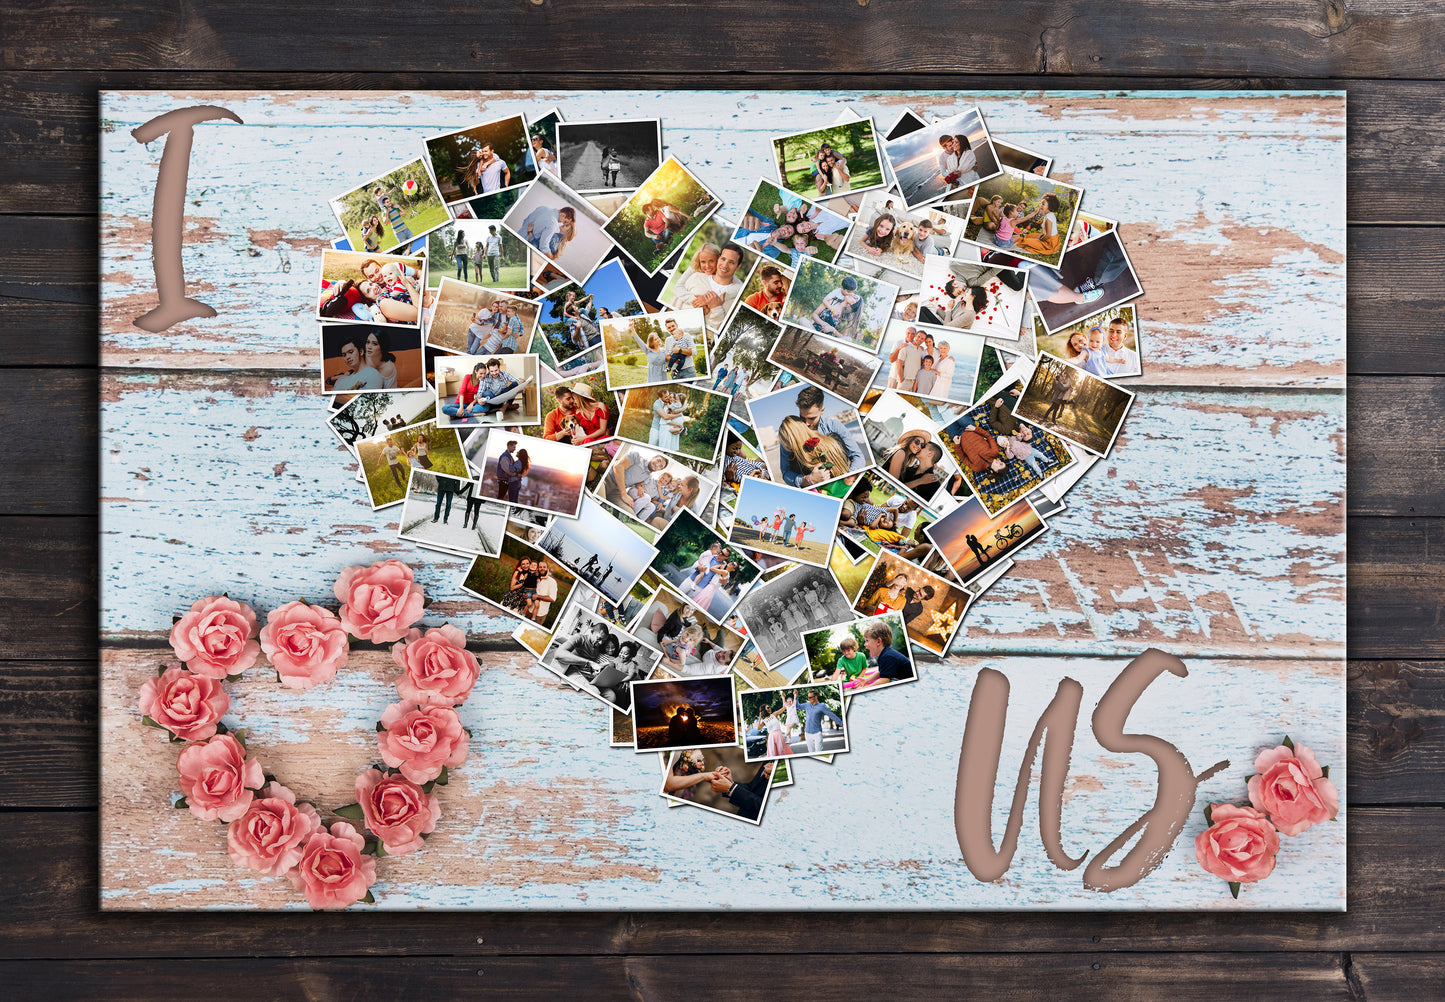 I Love Us - Photos of Us Collage Canvas Custom Personalized Wall Art